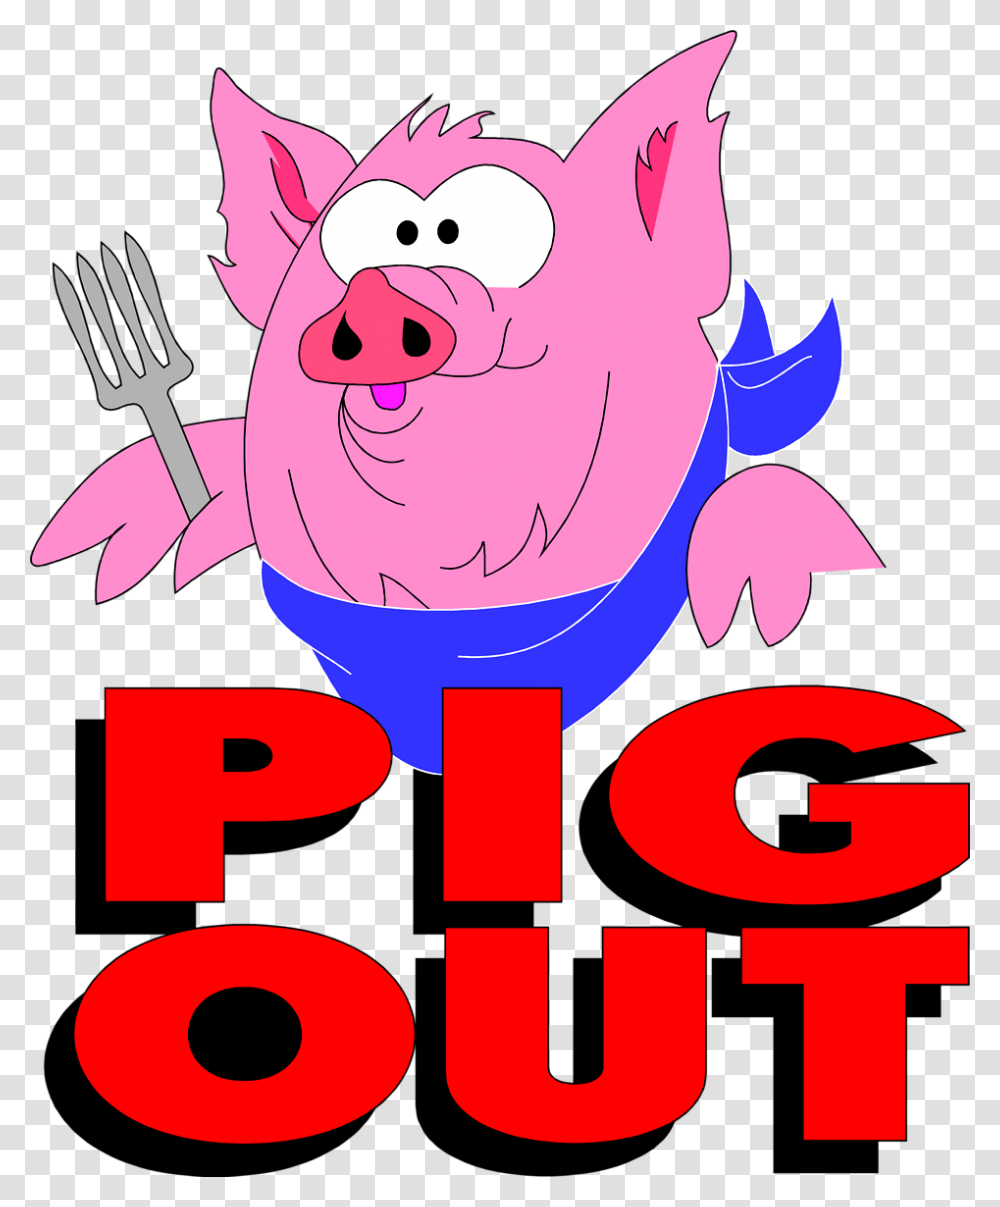 Pig Free Stock Photo Illustration Of A Pig And Pig Out Text, Fork, Cutlery, Poster, Advertisement Transparent Png